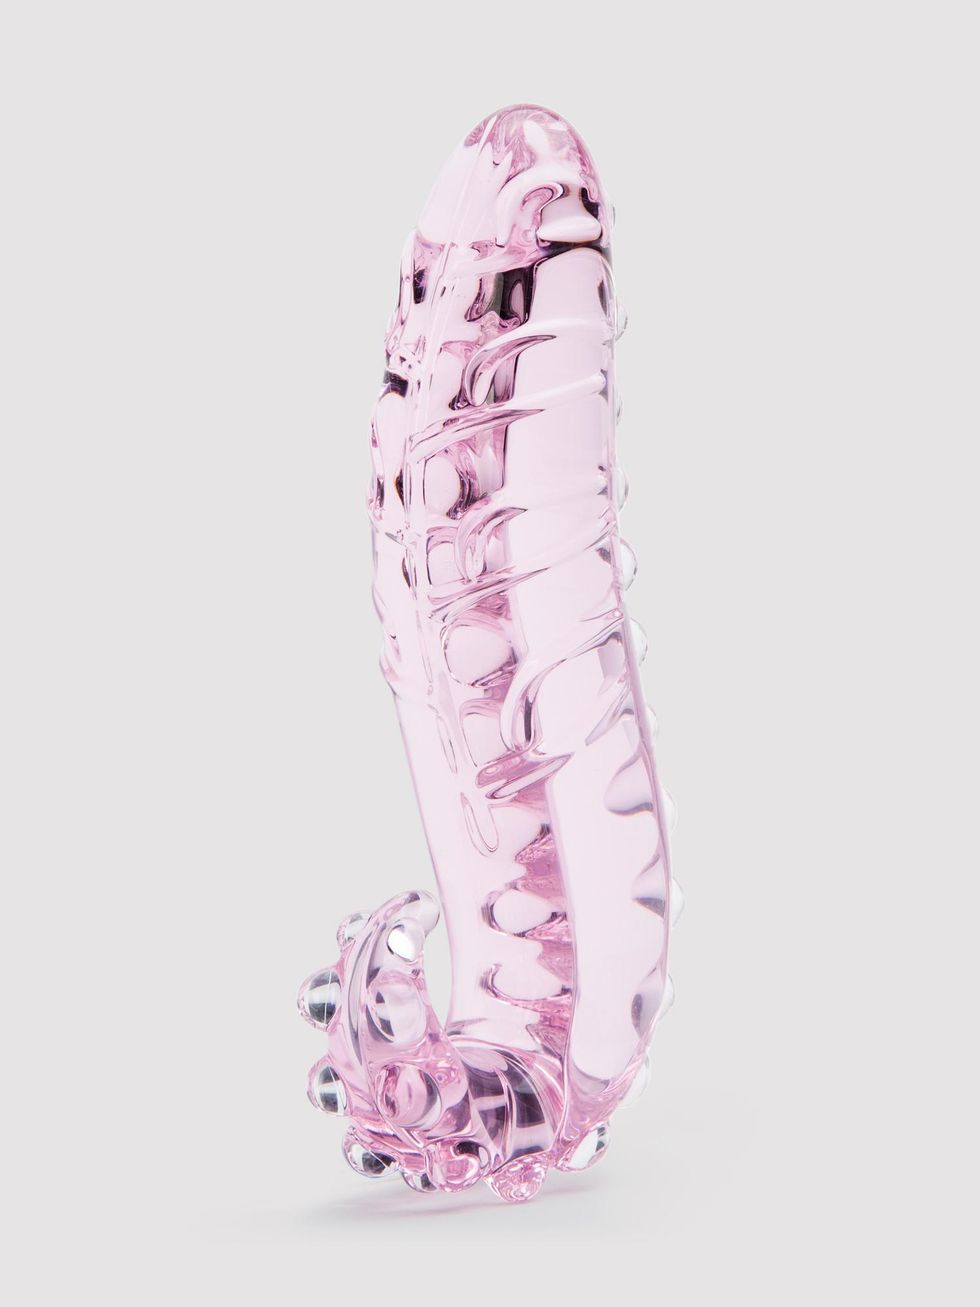 26 Weird Sex Toys for Getting Freaky in the Bedroom